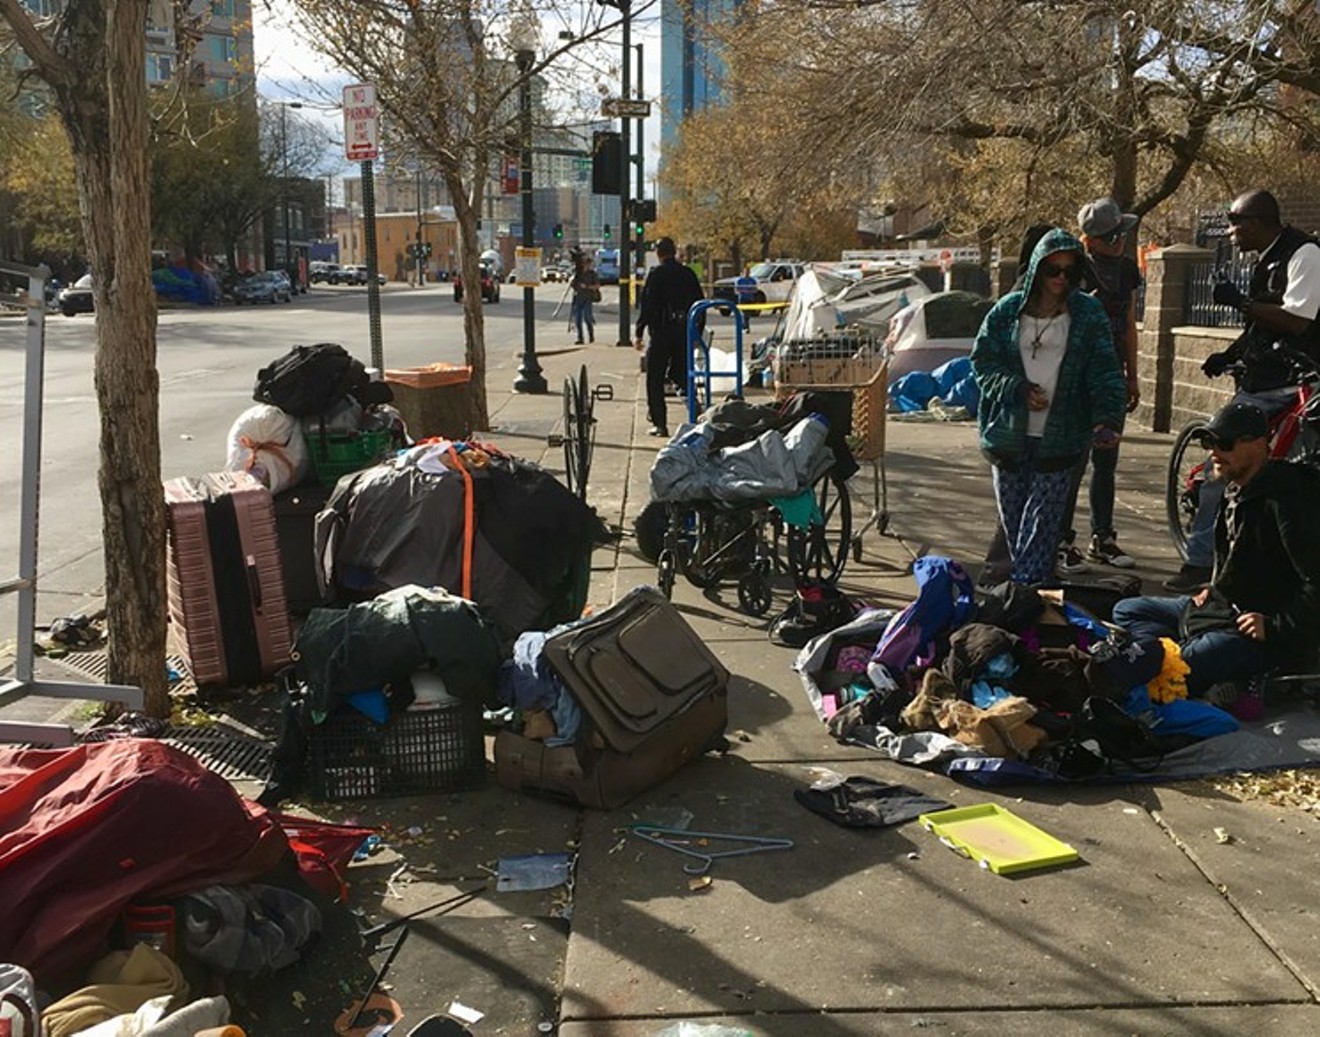 The city dismantled a 200-person-plus homeless encampment on October 29.